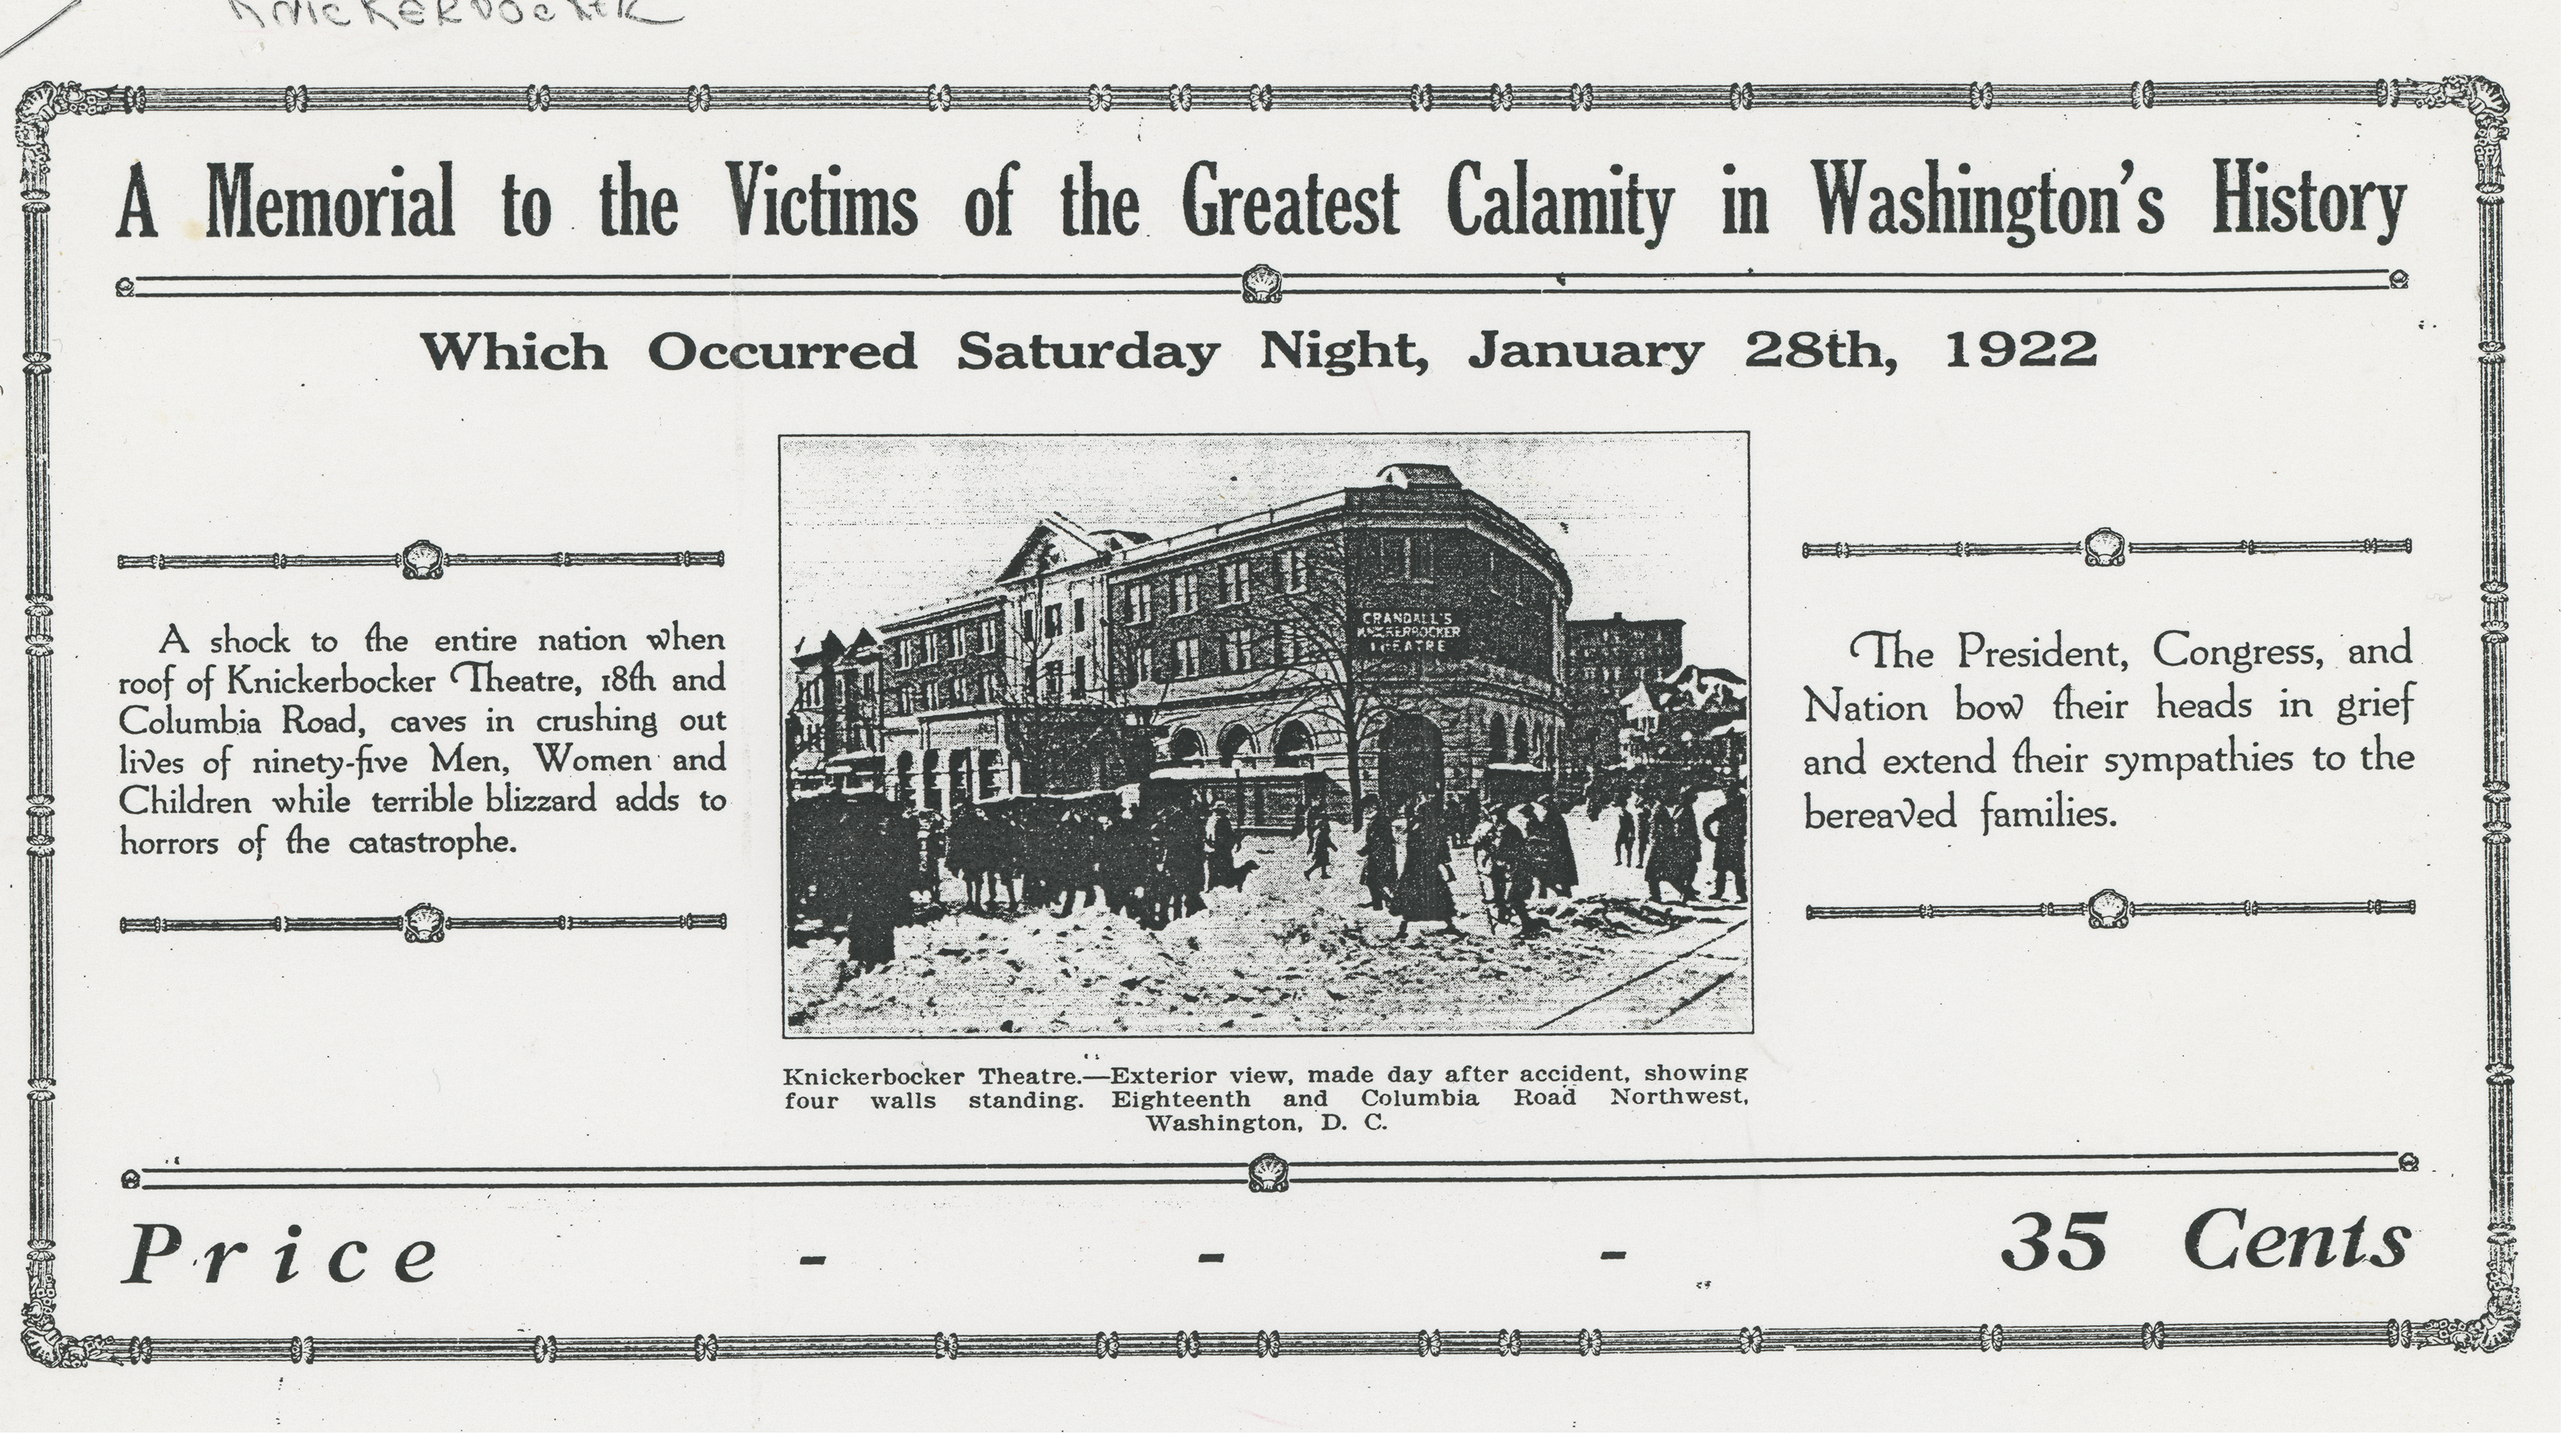 Newspaper clipping, headline "Memorial to the Victims of the Greatest Calamity in Washington's History." Clipping also includes photo of Knickerbocker Theatre